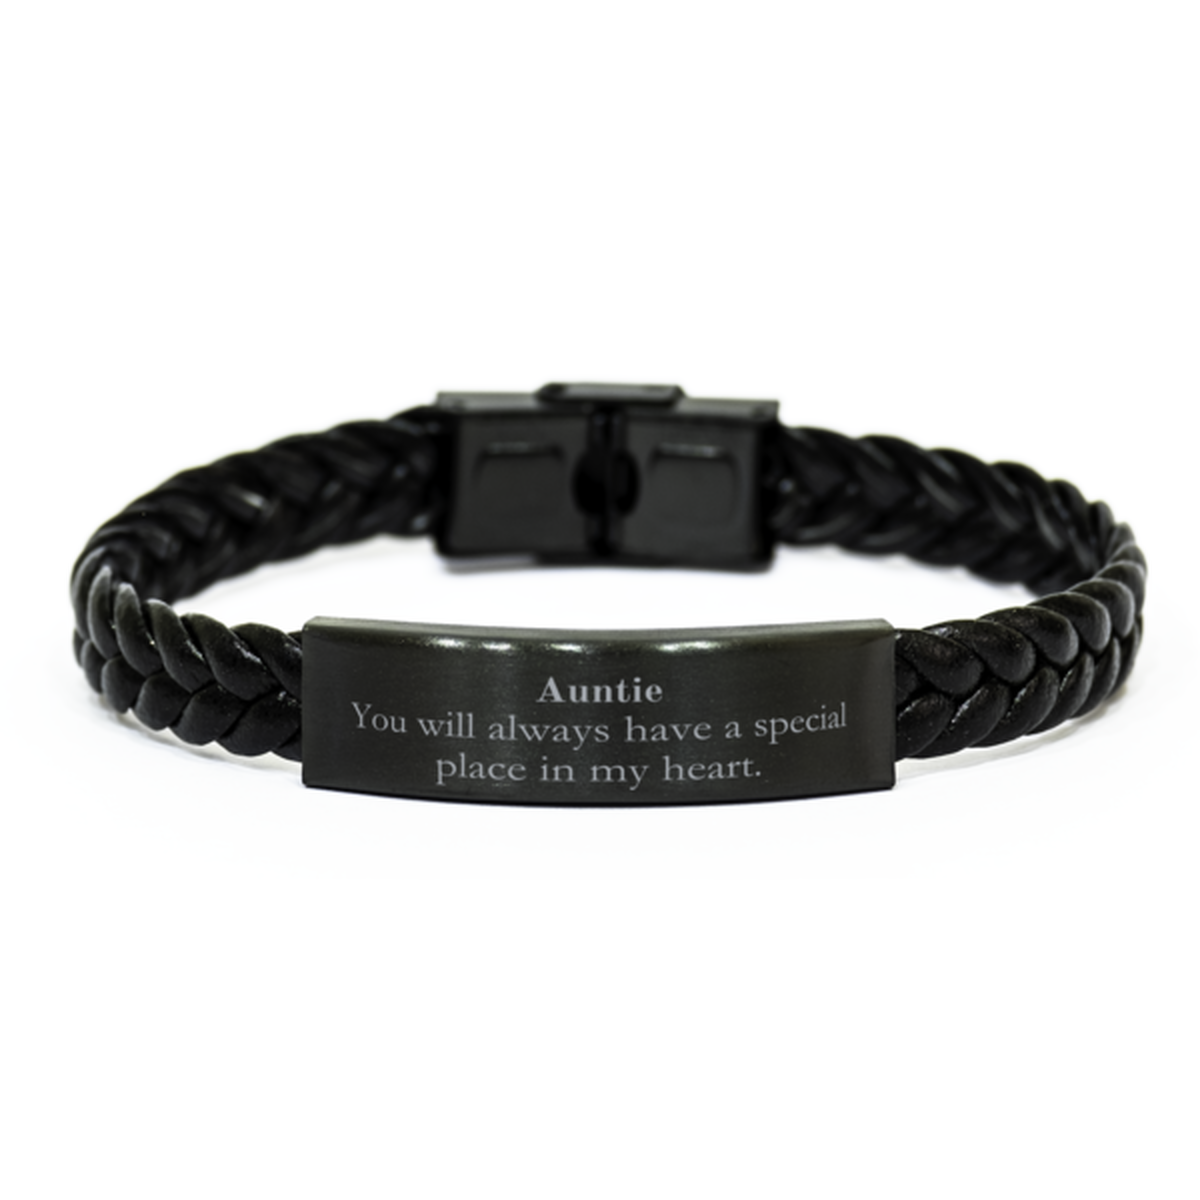 Braided Leather Bracelet Auntie Gift Engraved Christmas Birthday Unique Bracelet You will always have a special place in my heart